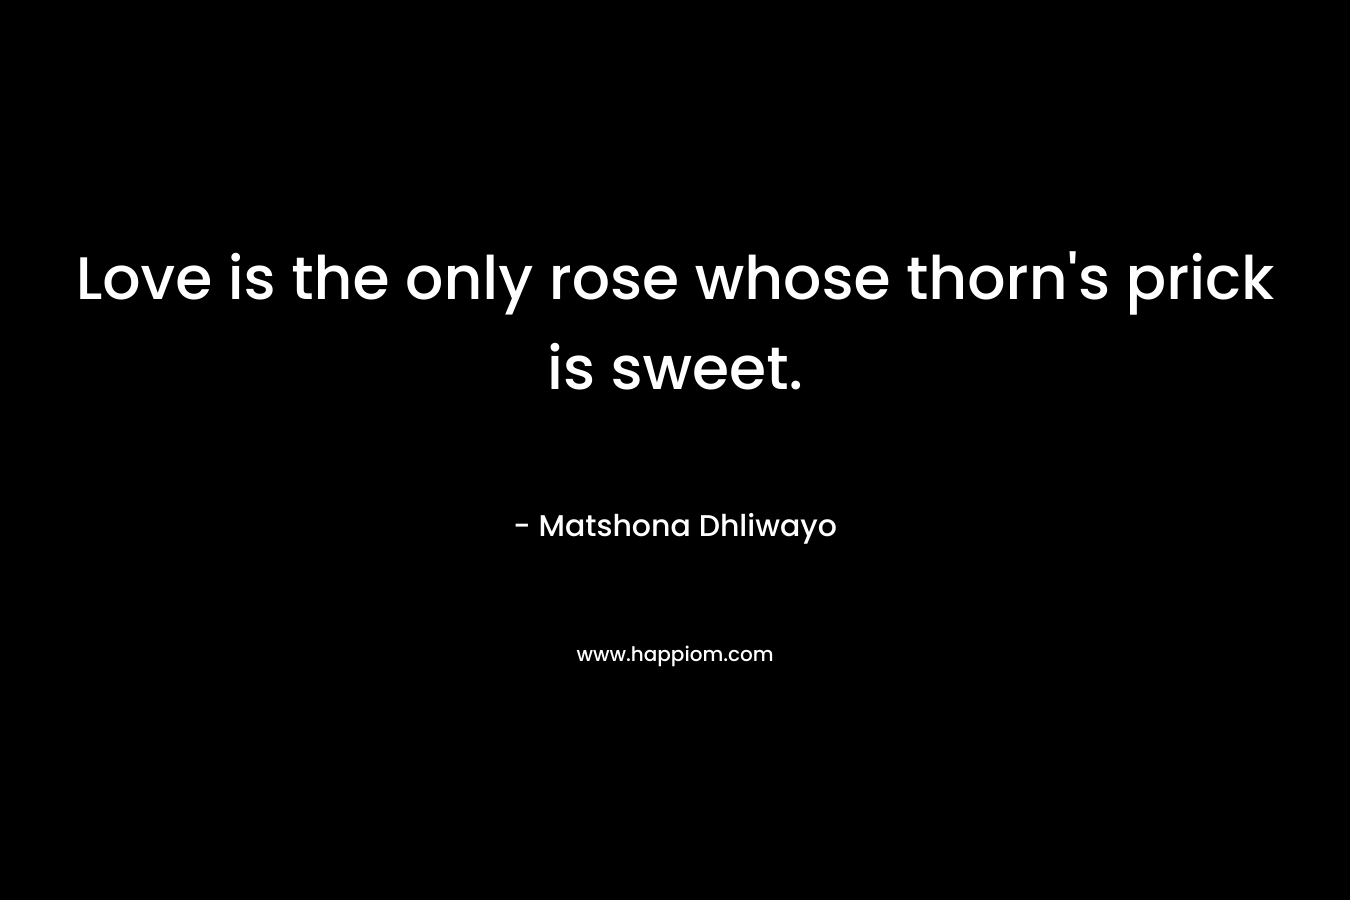 Love is the only rose whose thorn’s prick is sweet. – Matshona Dhliwayo